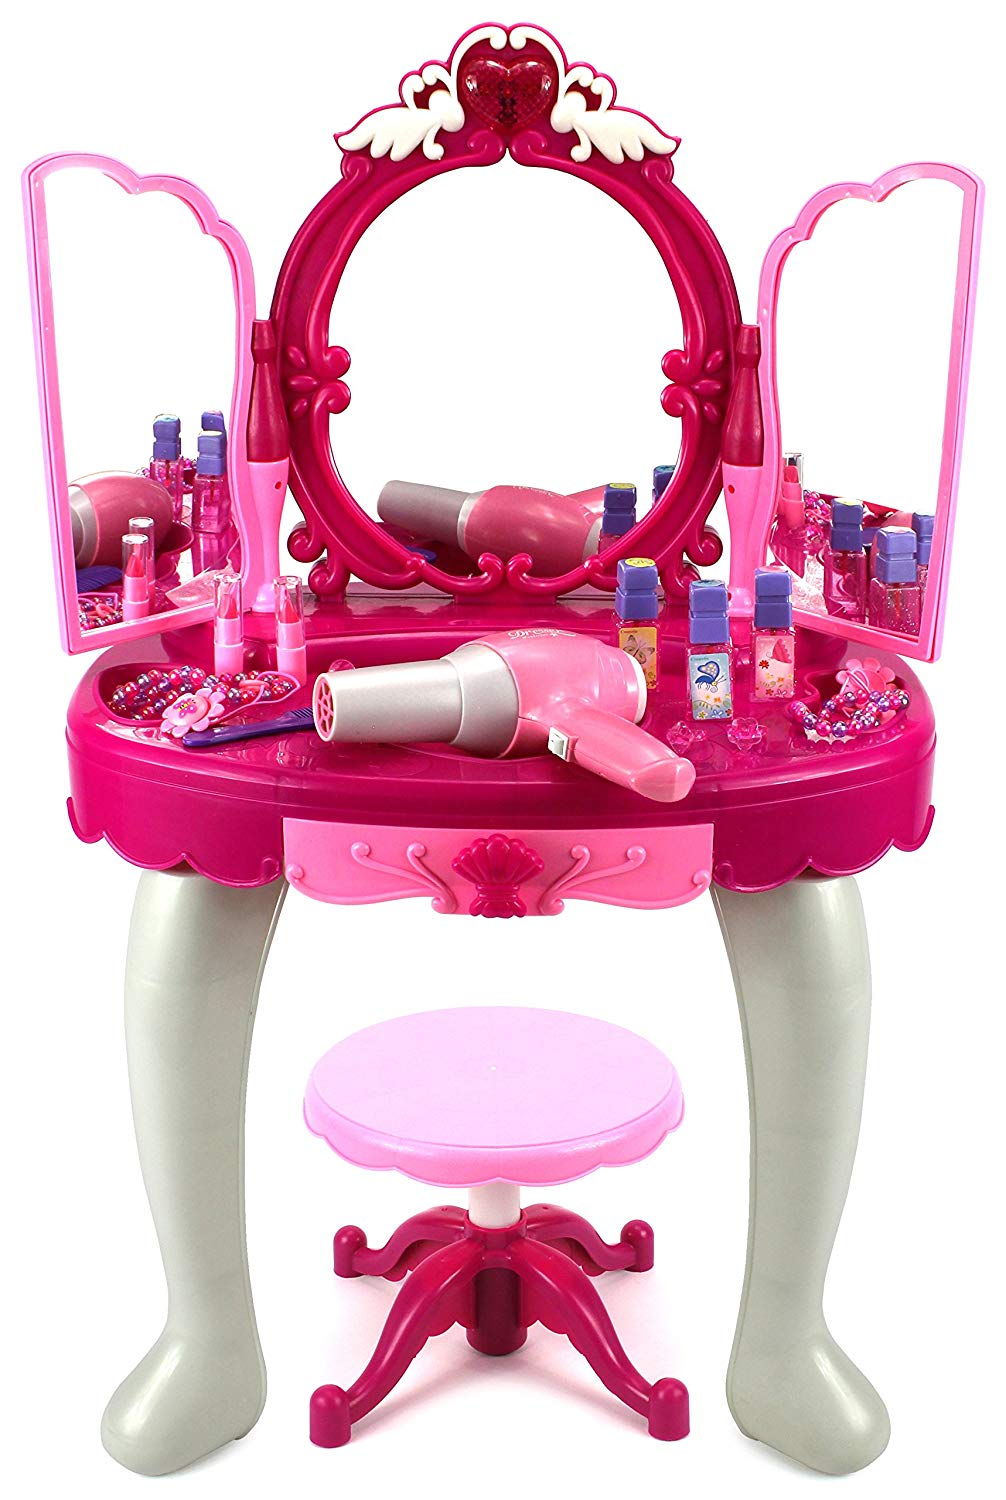 Kids Accessories amazon.com: kids authority glamorous triple mirror pretend play battery  operated toy beauty mirror USECAIW